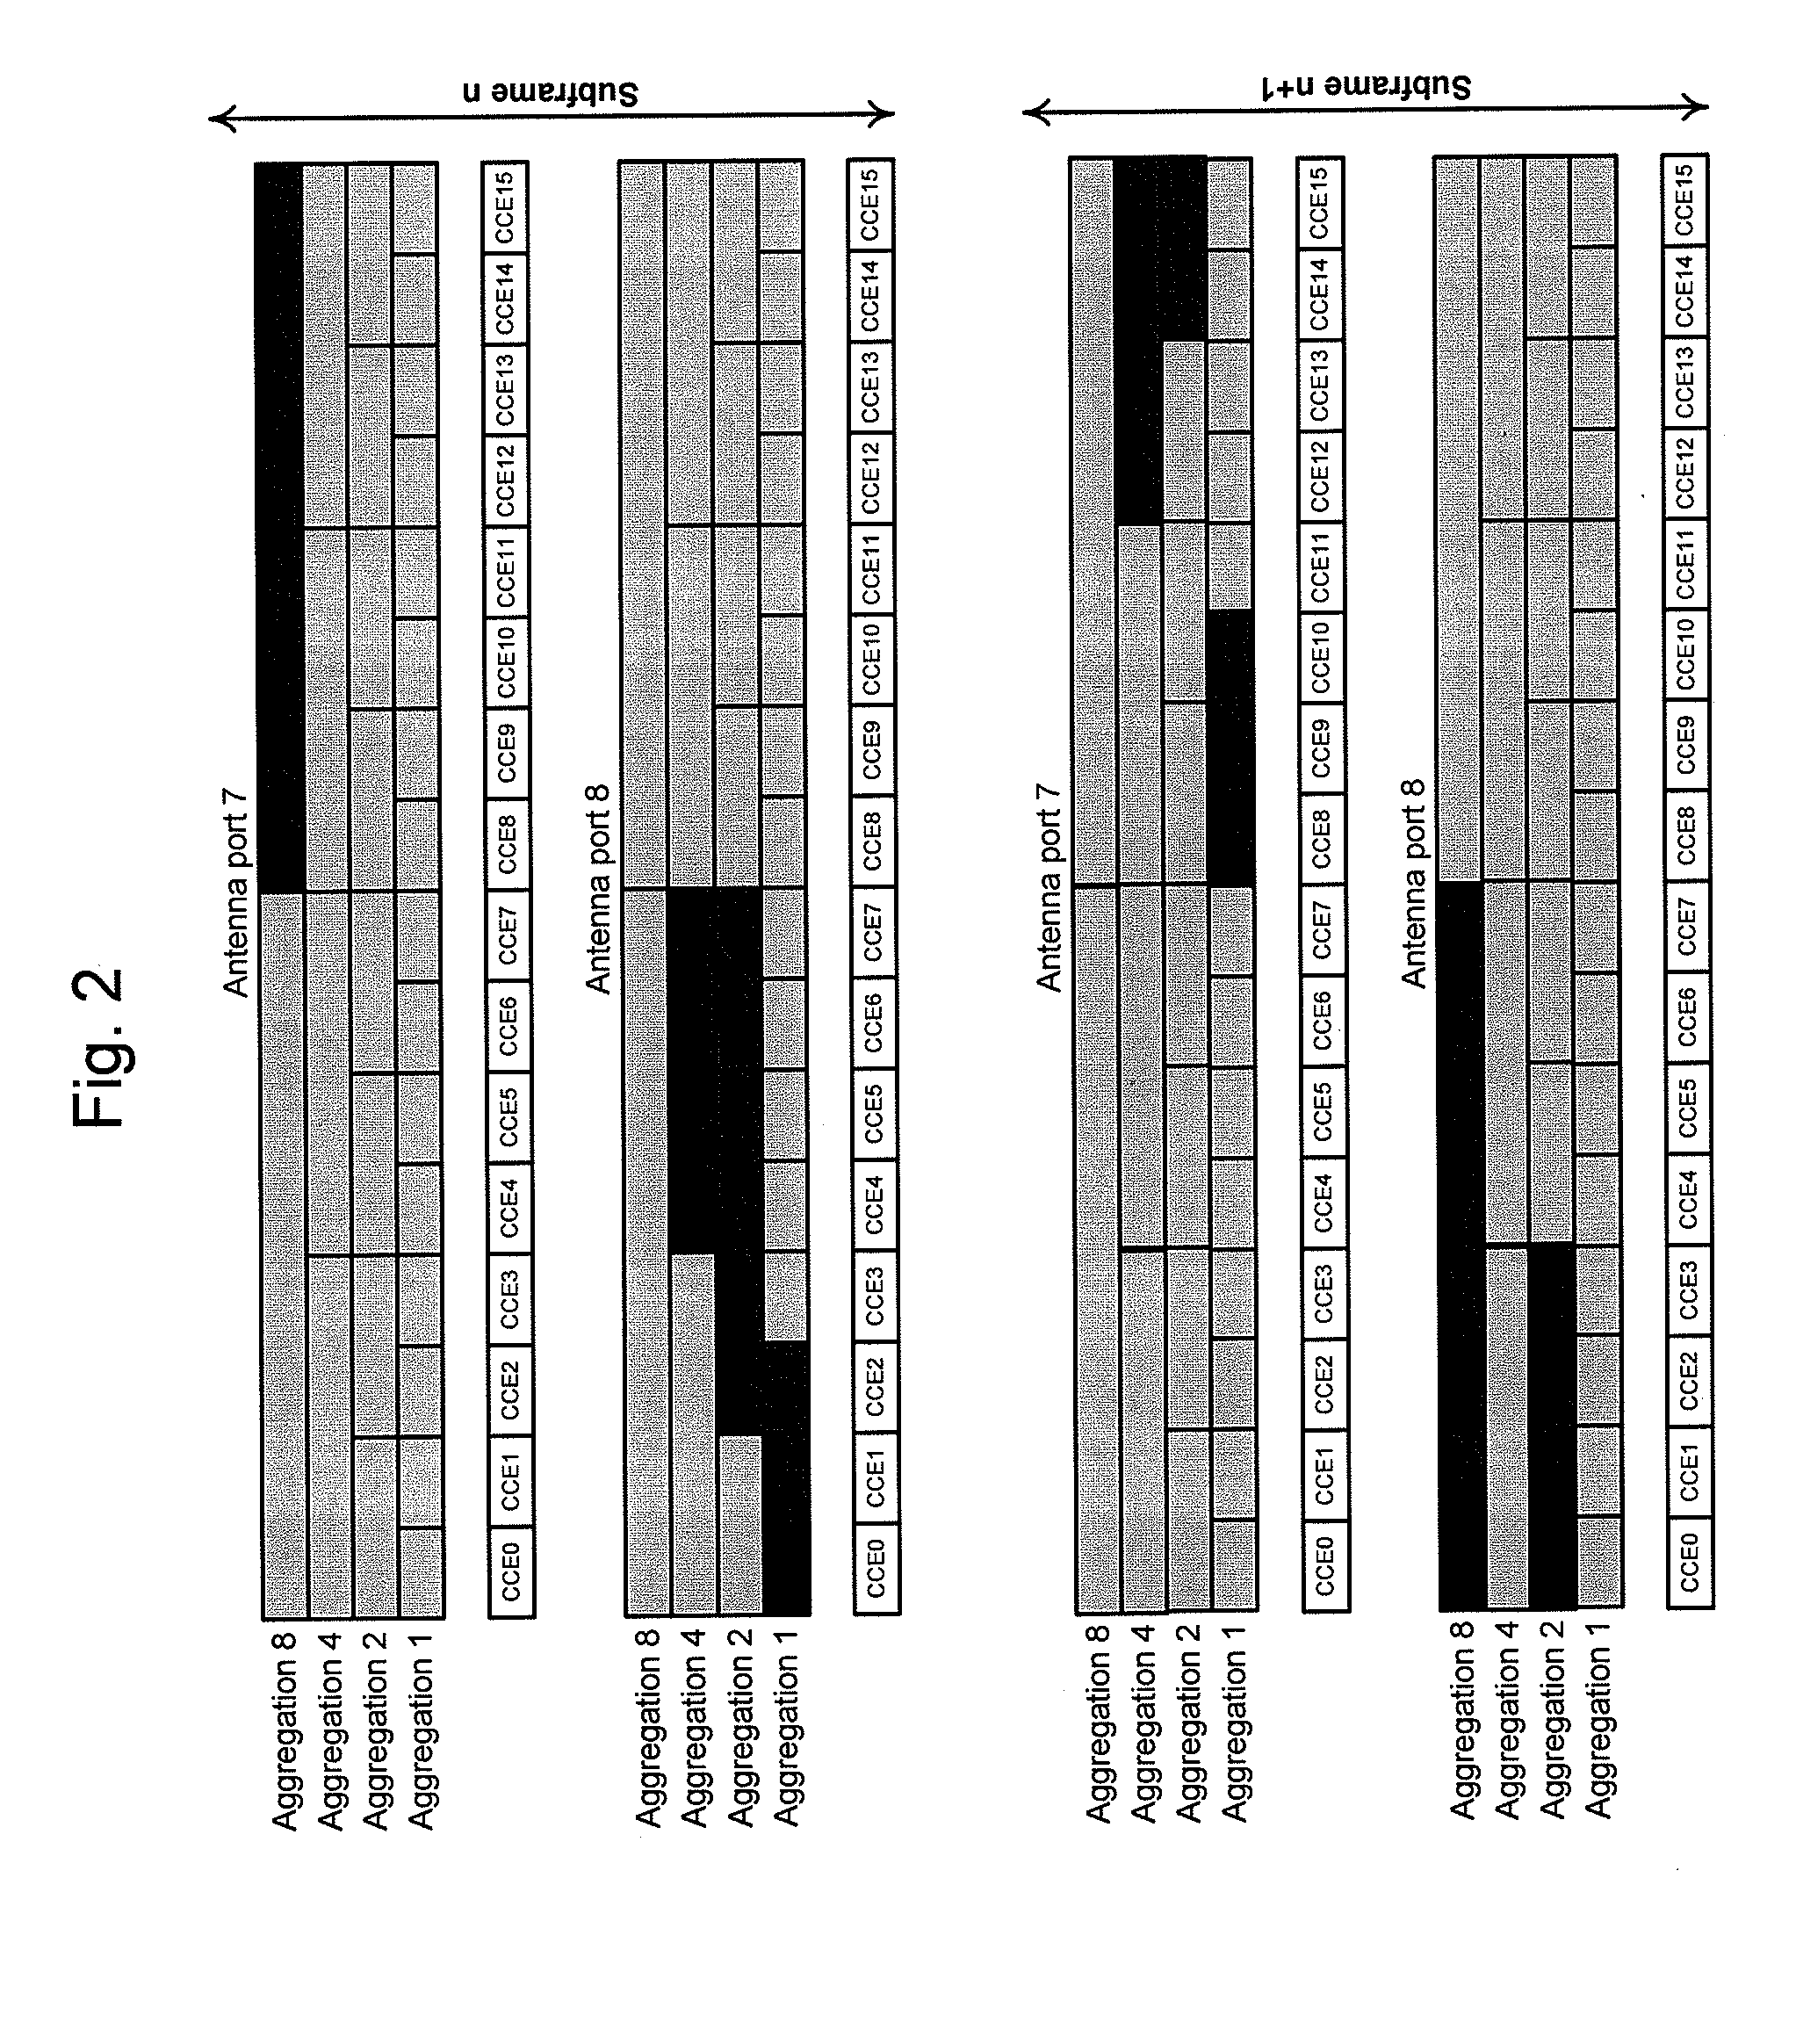 Spatial hashing for enhanced control channel search spaces